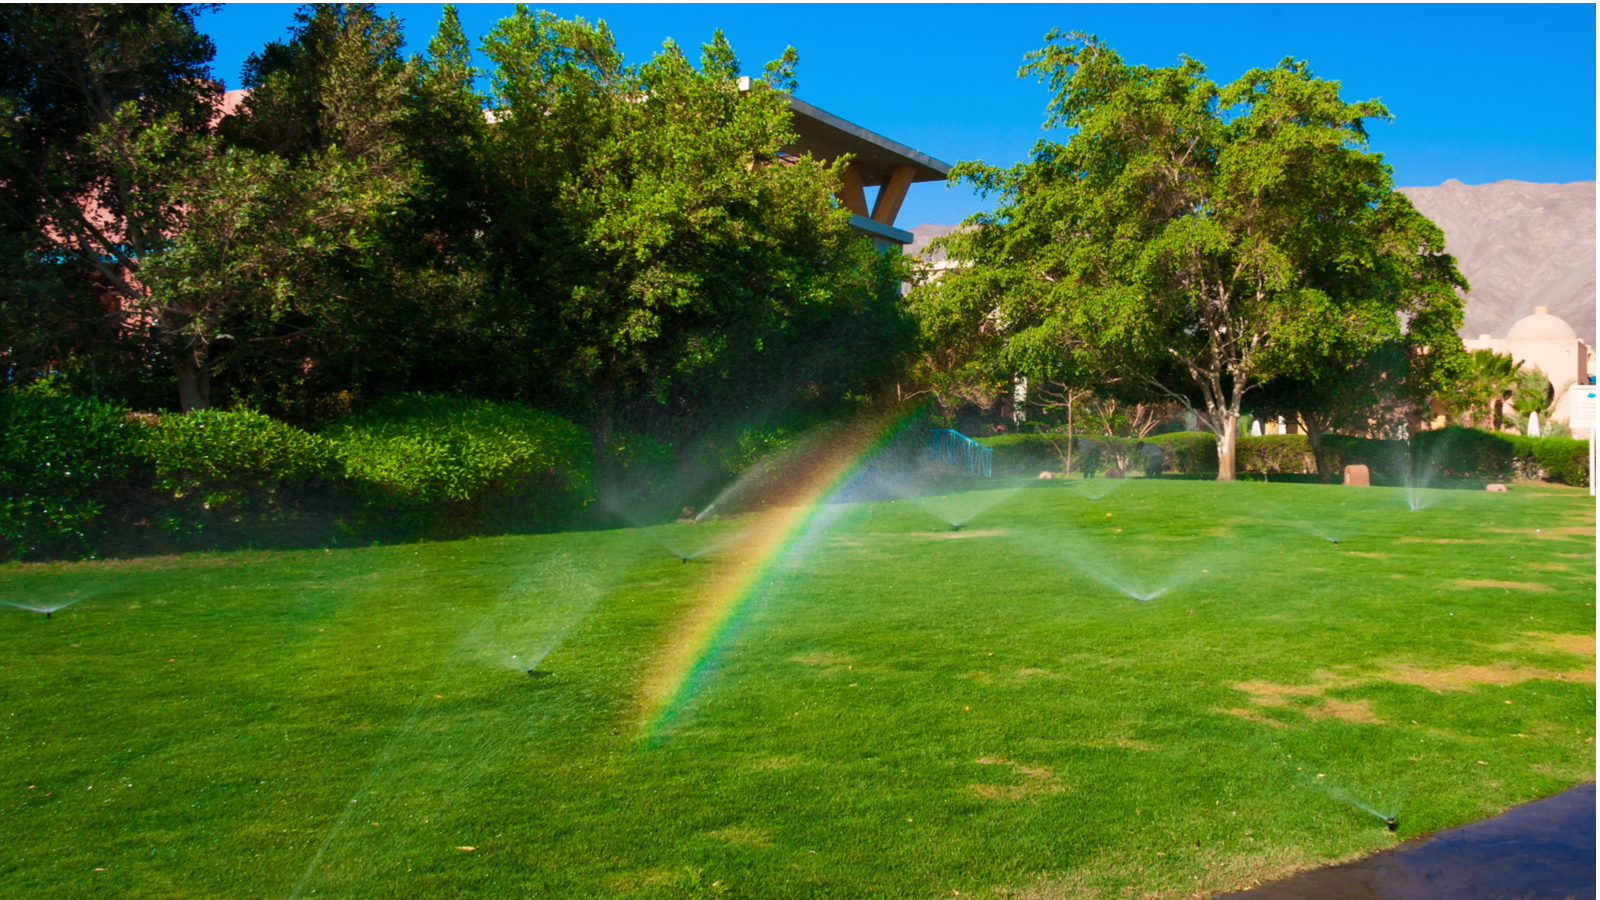 sprinkler-system-startup-Country Life Acres-MO | Country Life Acres, MO area sprinkler systems | Lawn Sprinklers of St. Louis